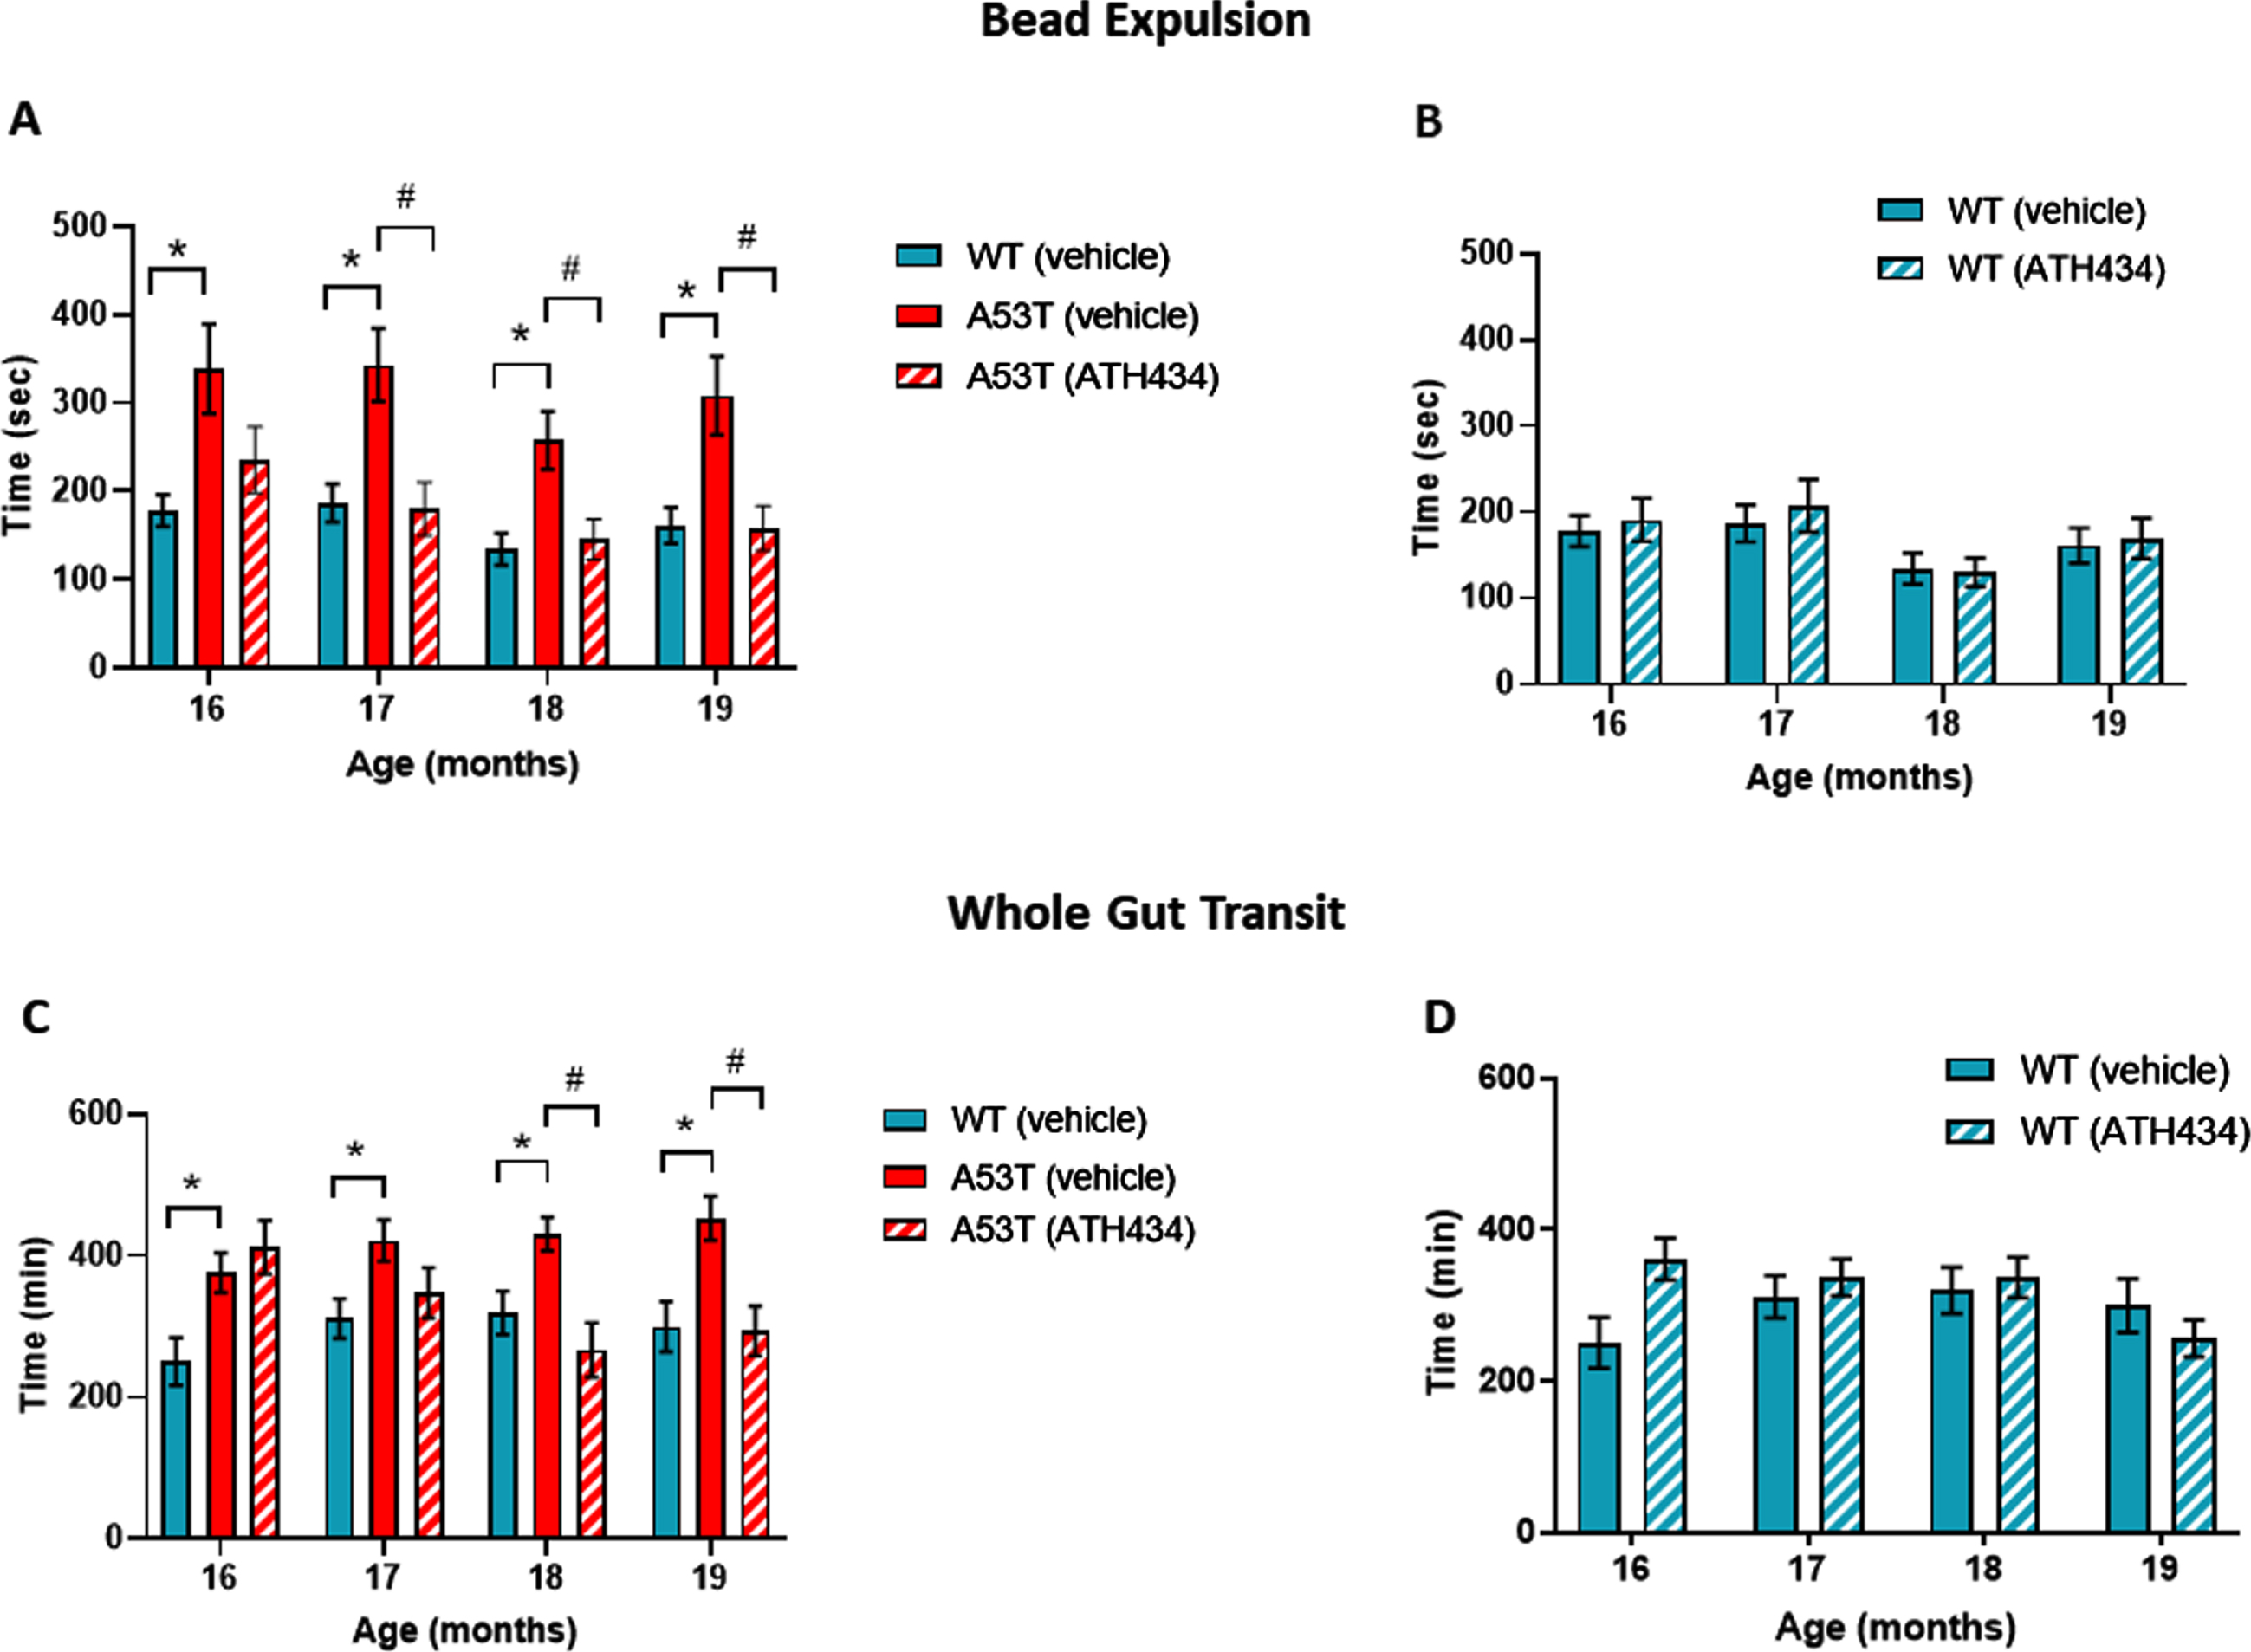 Effect of ATH434 on bead expulsion and whole gut transit in mice with PD symptoms (treatment group). Vehicle-treated A53T mice had significant deficits in colonic motility, as assessed by the bead expulsion test, when compared to vehicle-treated WT mice at all timepoints (p < 0.05). Overall, ATH434, administered from the beginning of month 15 to the beginning of month 19, reduced the deficit in colonic motility, with a significant reduction in bead expulsion time observed at 2, 3, and 4 months after commencement of feeding in A53T mice (p < 0.05) (A). ATH434 had no effect on bead expulsion times in WT mice (B). Whole gut transit time was significantly delayed in A53T vehicle-treated mice when compared with vehicle-treated WT mice at all time points (p < 0.05). ATH434 significantly reduced whole gut transit time in A53T mice following 3 and 4 months of treatment (p < 0.05) (C), but had no effect on WT mice (D). Data were analyzed by two-way ANOVA (mixed model) followed by Sidak’s multiple comparison post hoc test. Data represent the mean±SEM; *p < 0.05 for WT (vehicle) versus A53T (vehicle); #p < 0.05 for A53T (vehicle) versus A53T (ATH434); n = 17–24 for WT vehicle and WT ATH434 mice and n = 9–18 for A53T vehicle and A53T ATH434 mice.